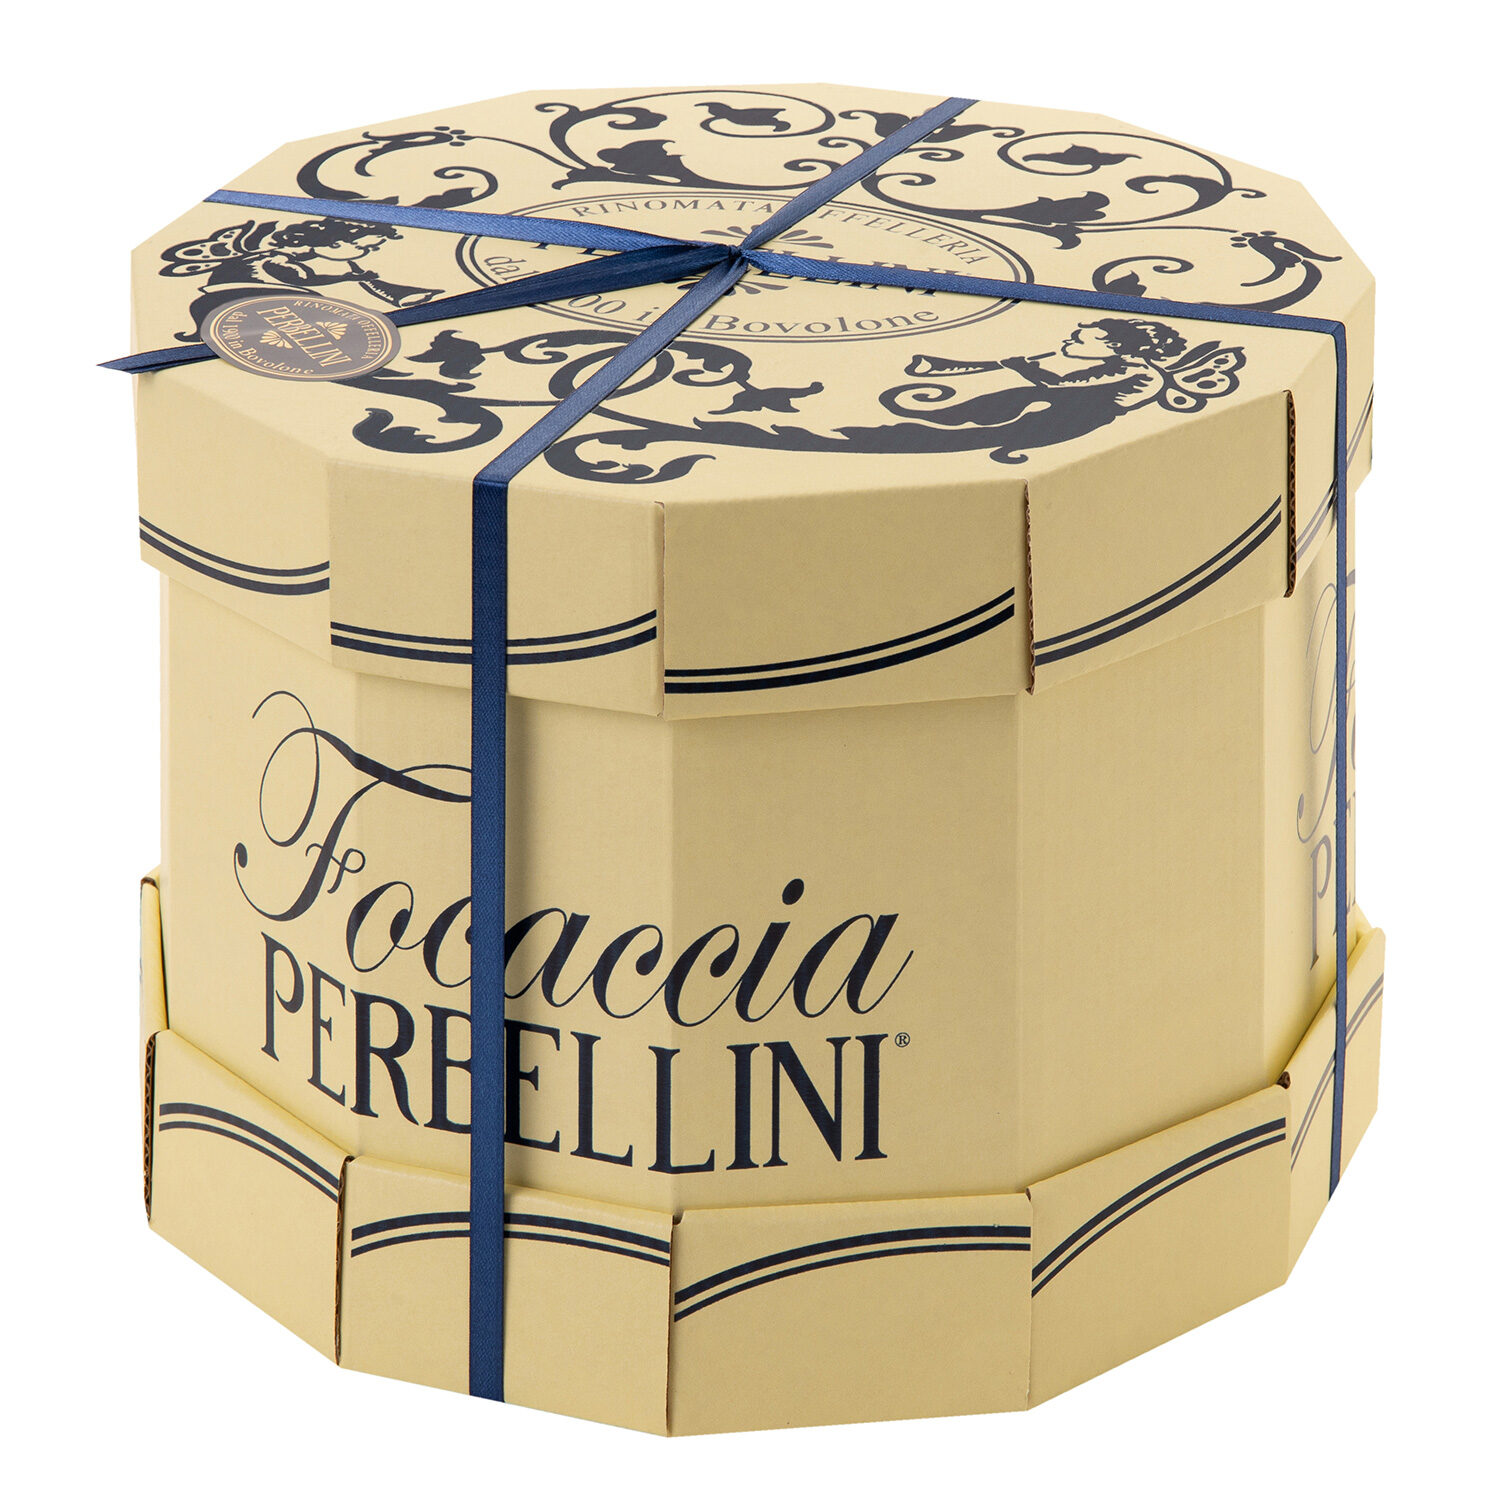 Offella d'Oro® Baked goods